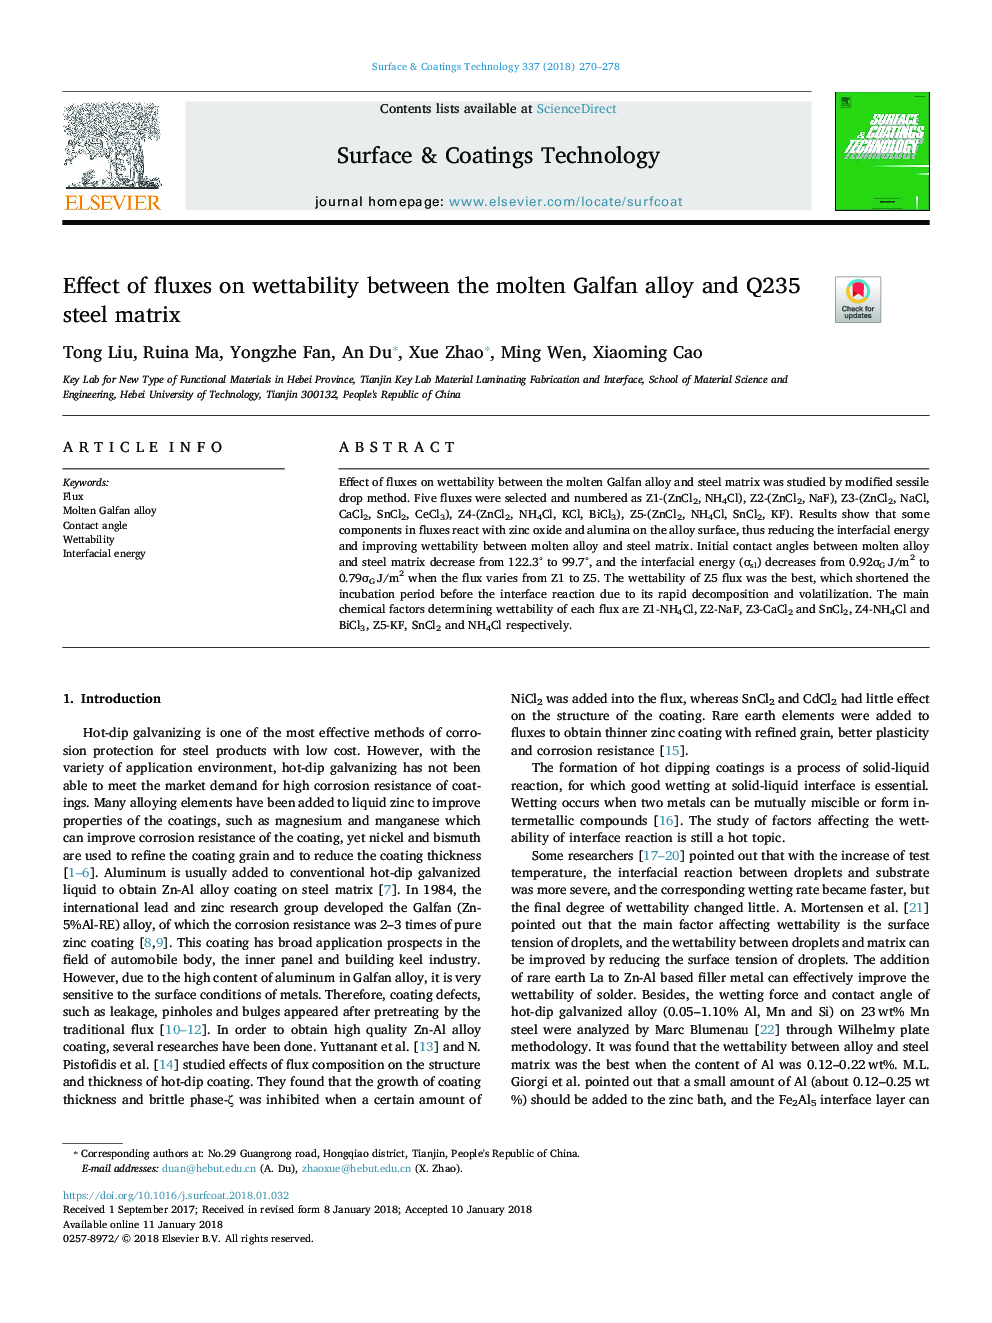 Effect of fluxes on wettability between the molten Galfan alloy and Q235 steel matrix